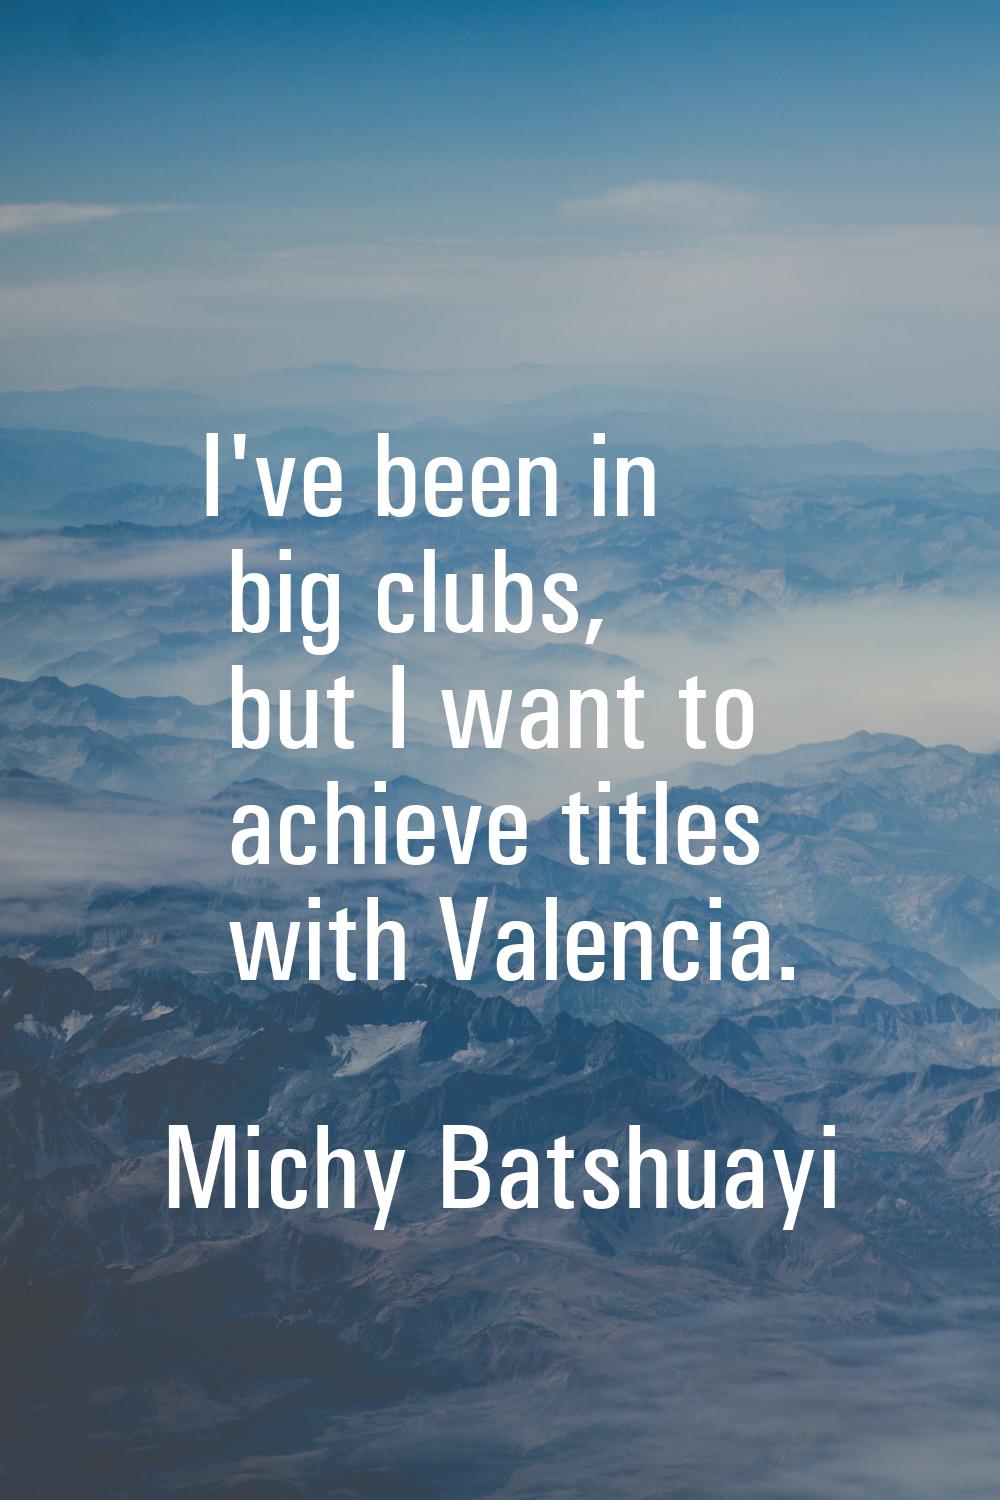 I've been in big clubs, but I want to achieve titles with Valencia.